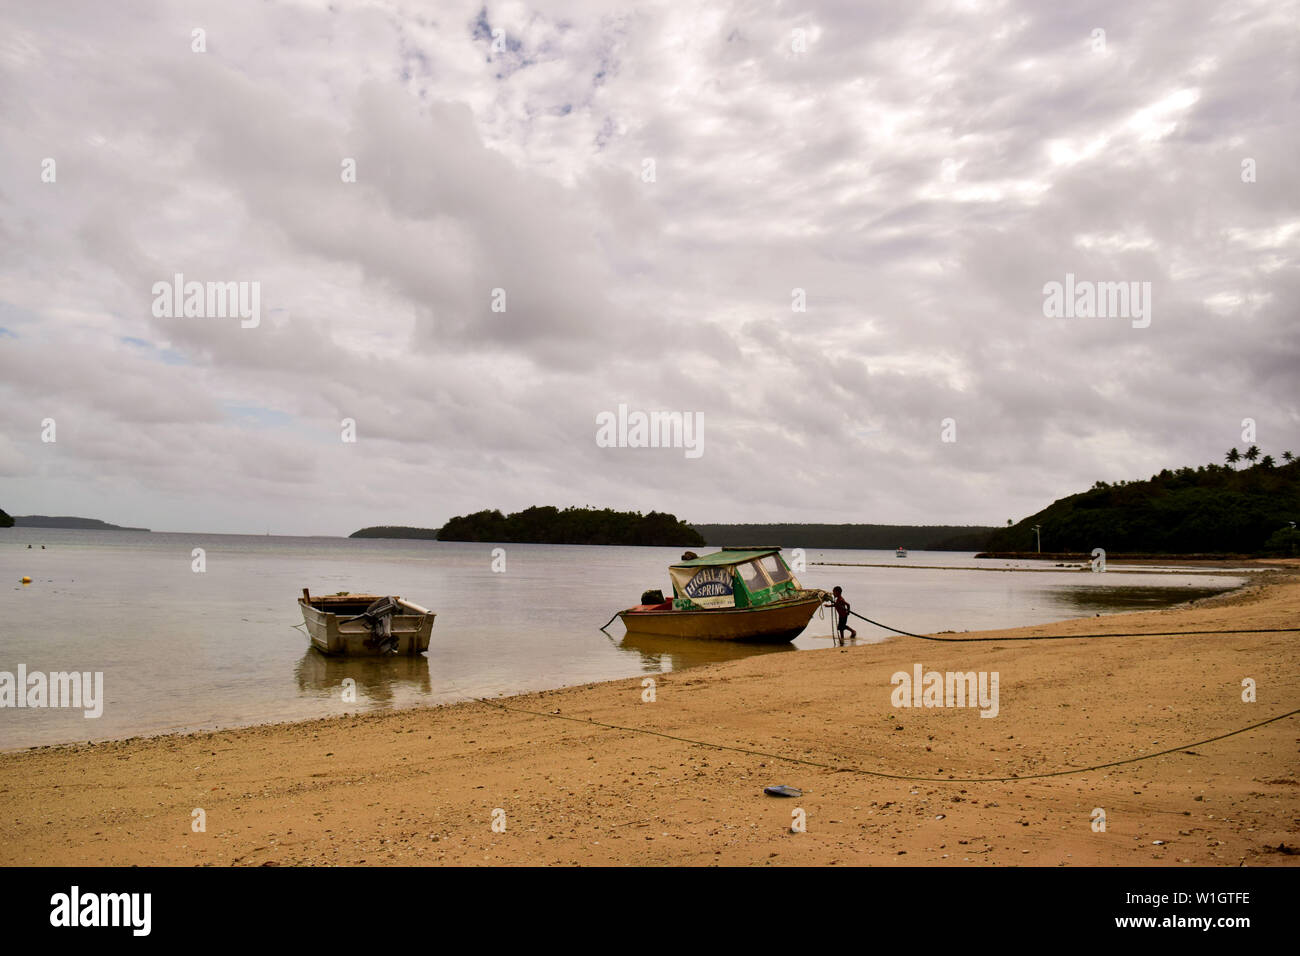 A boy with a boat on a beach in Tonga Stock Photo